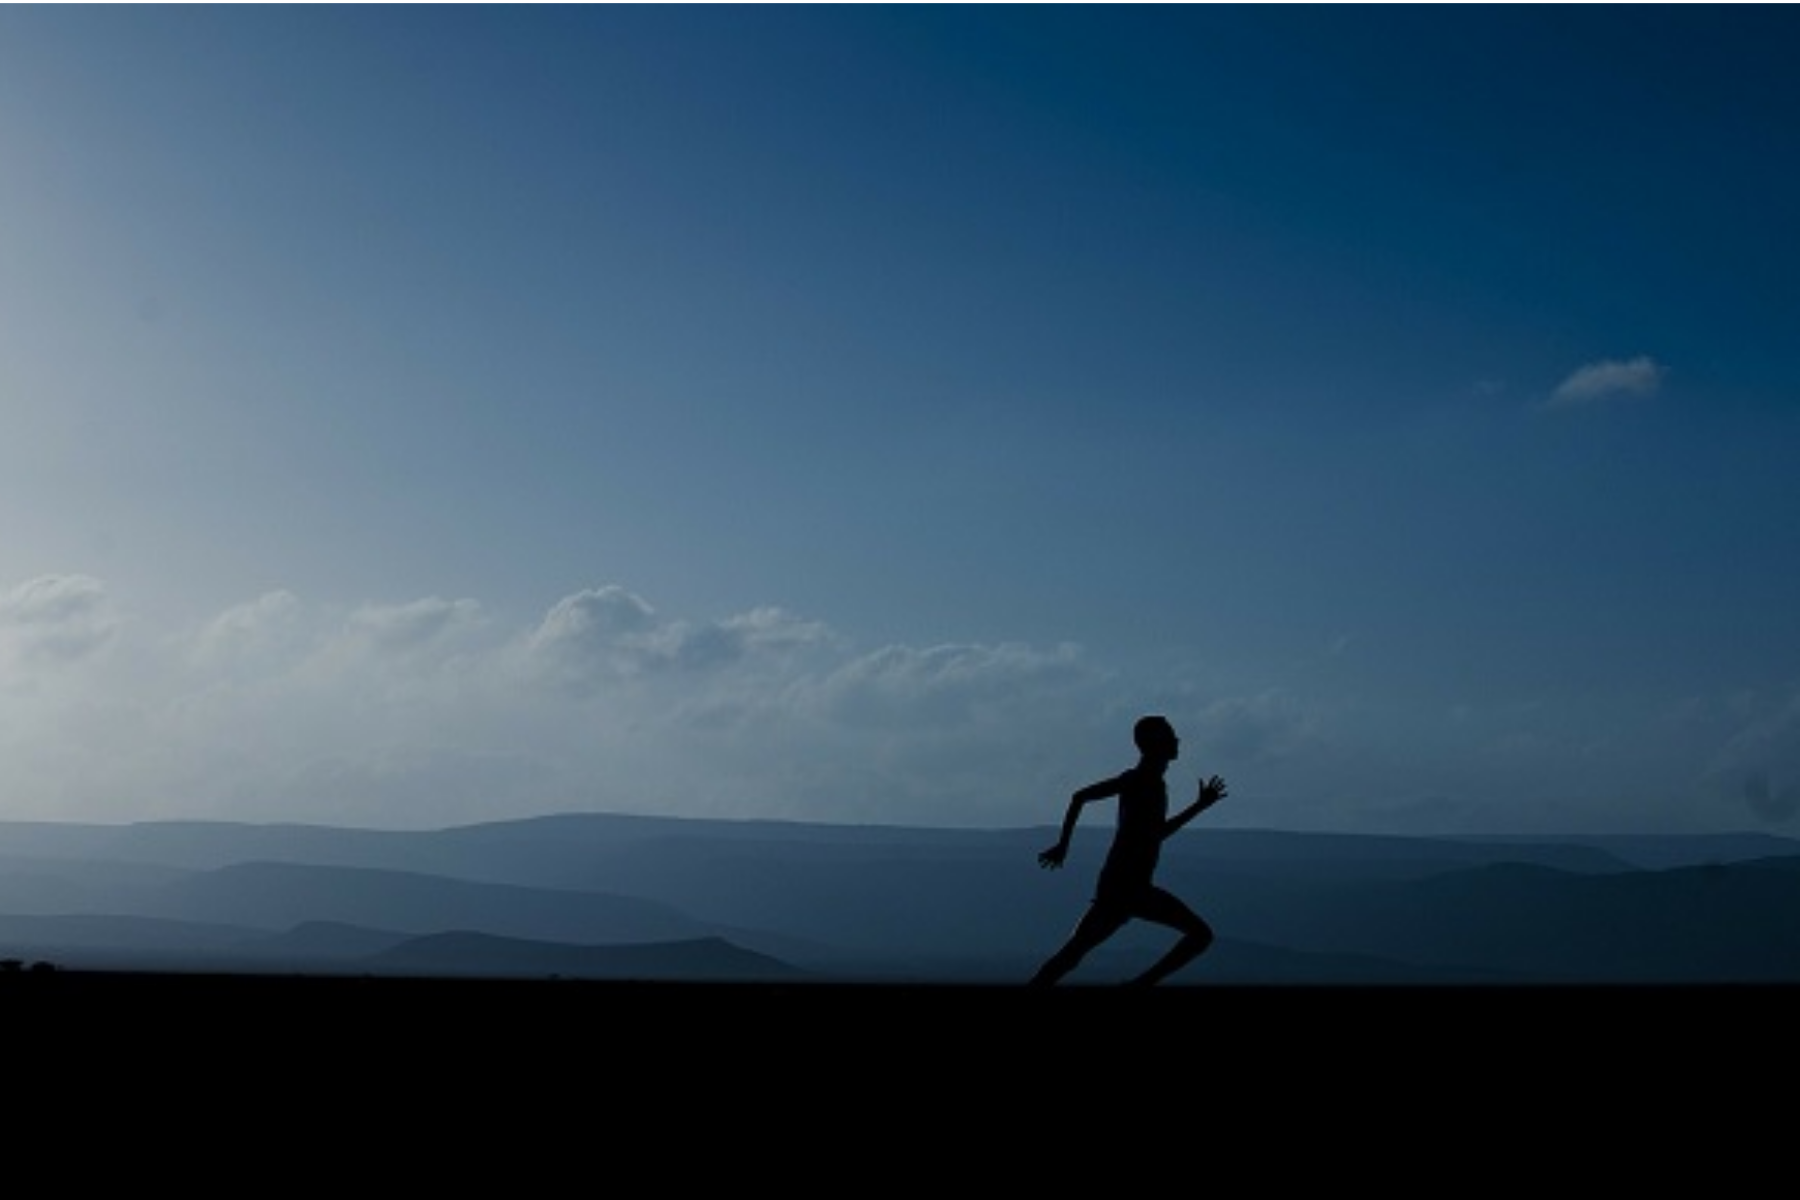 A guy running in silhouette